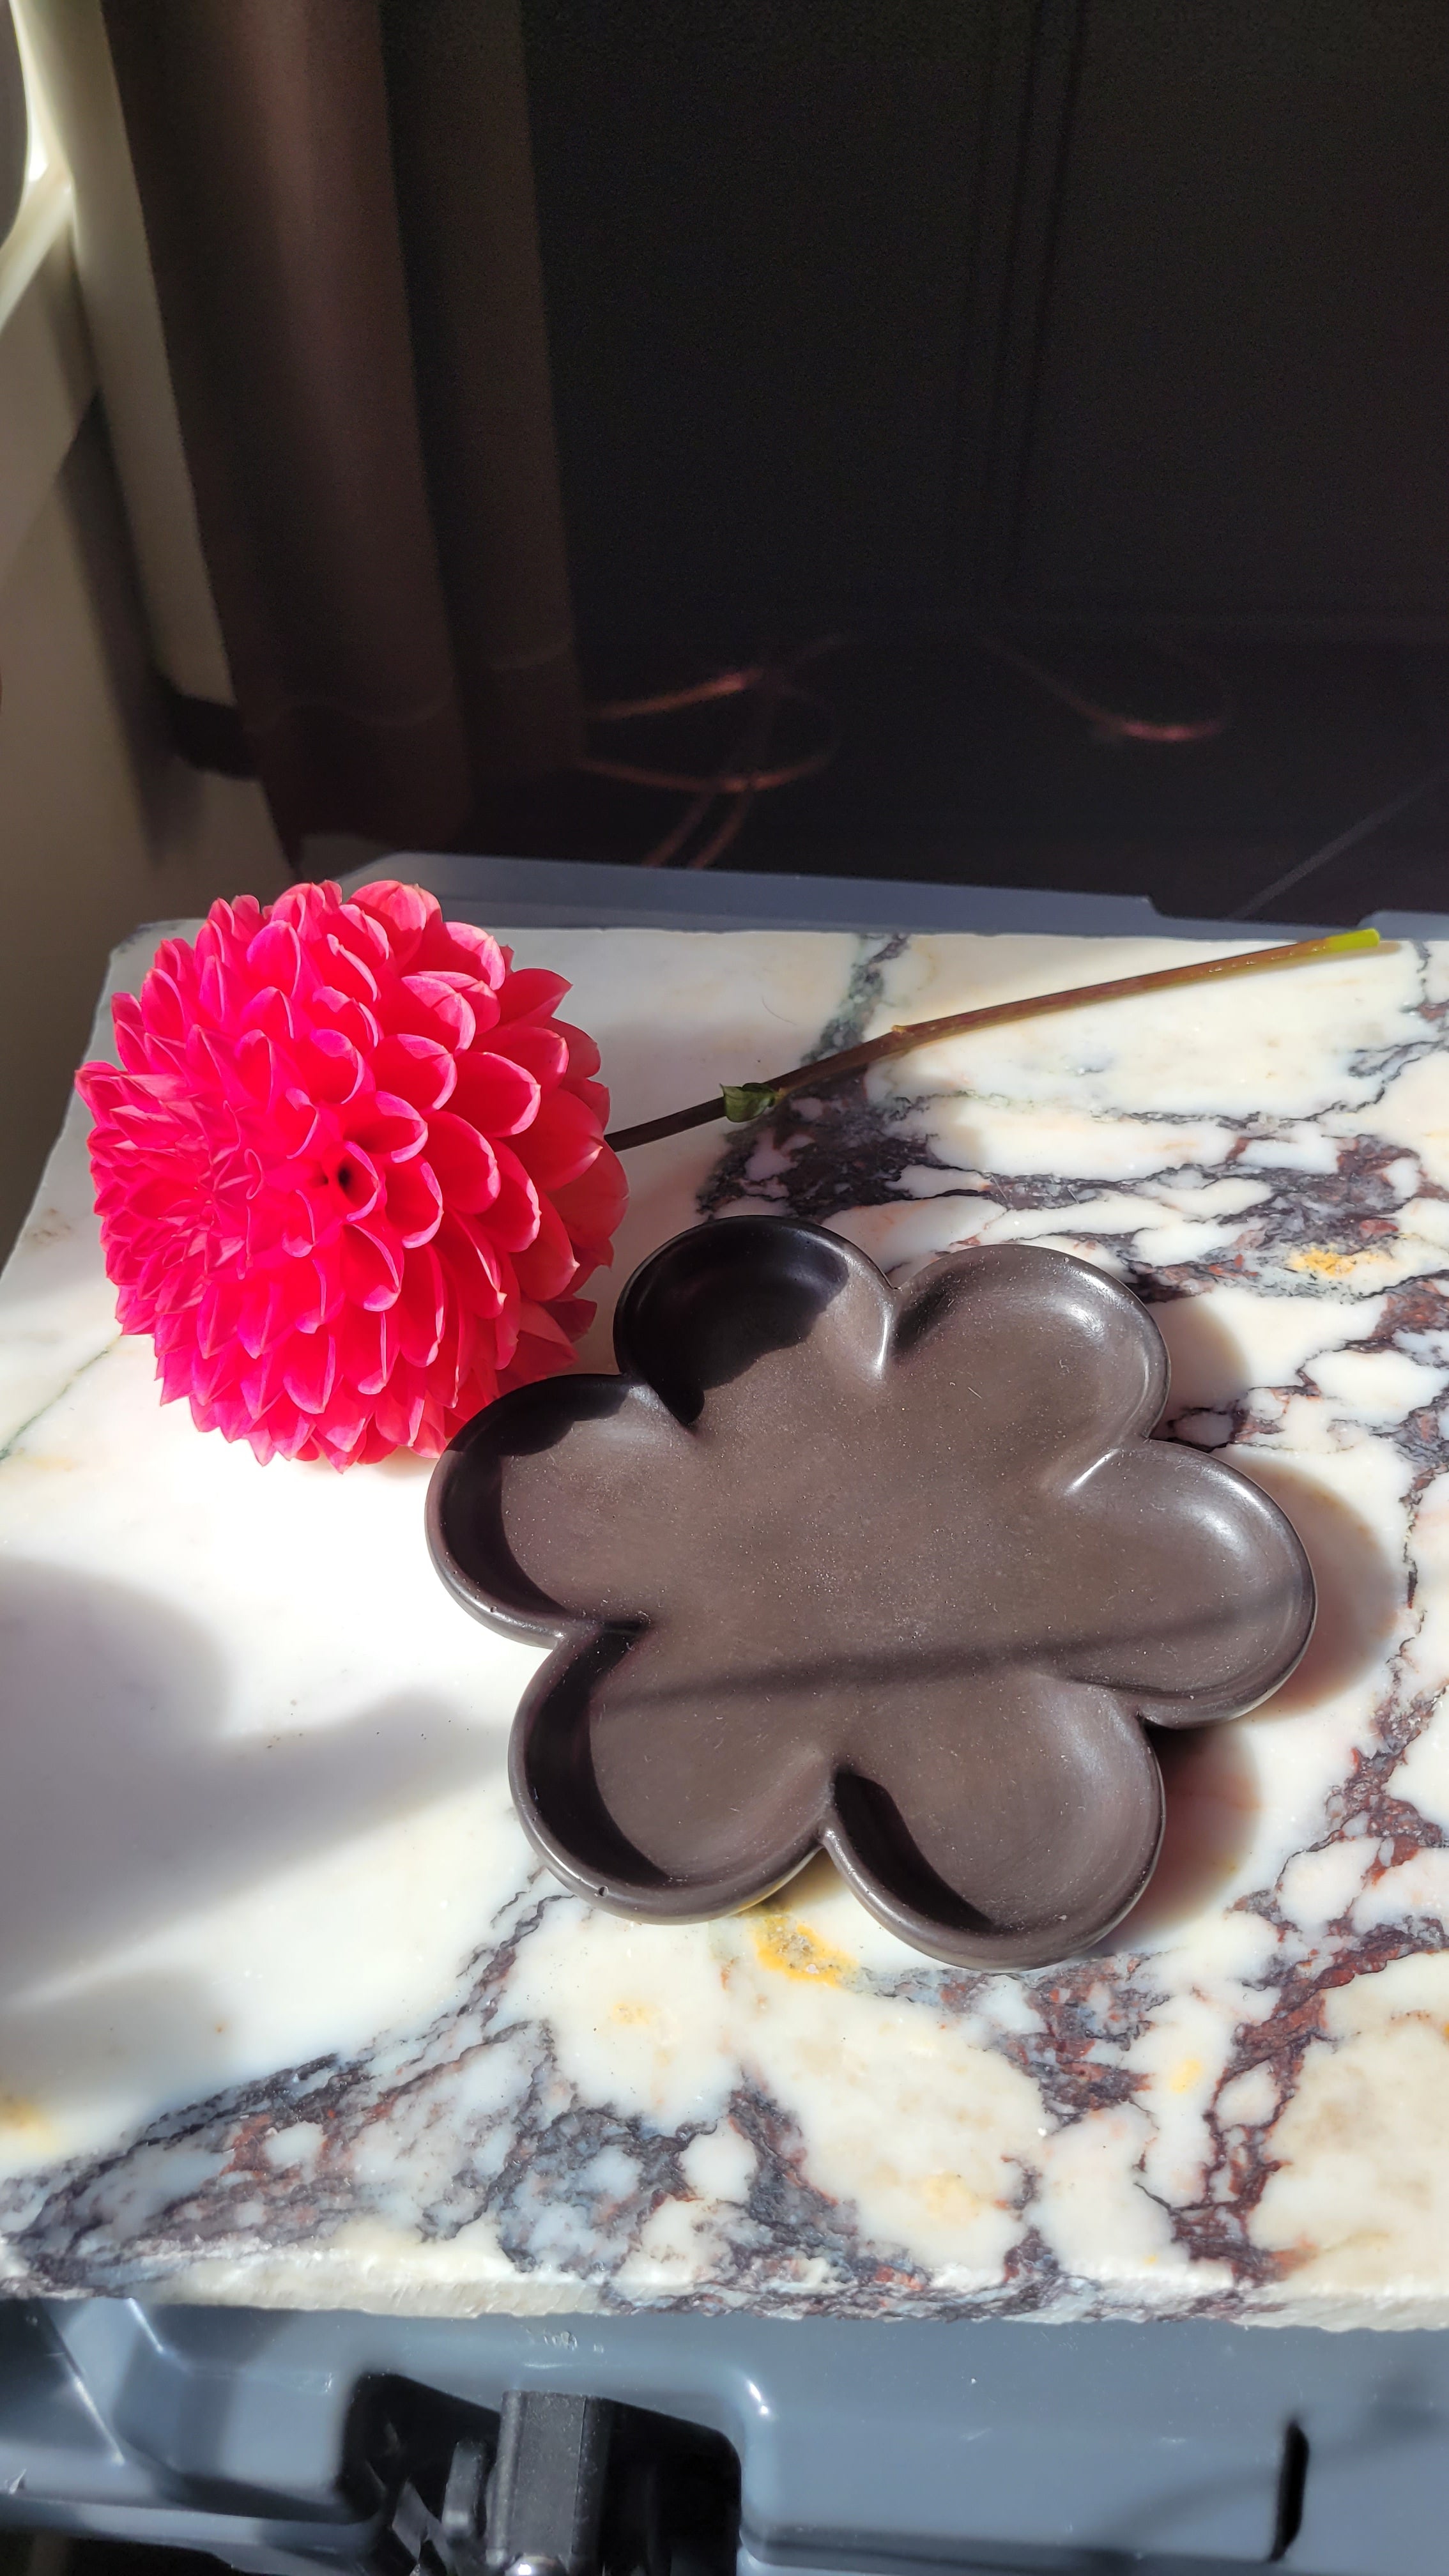 Object #13 - Small Flower Dish